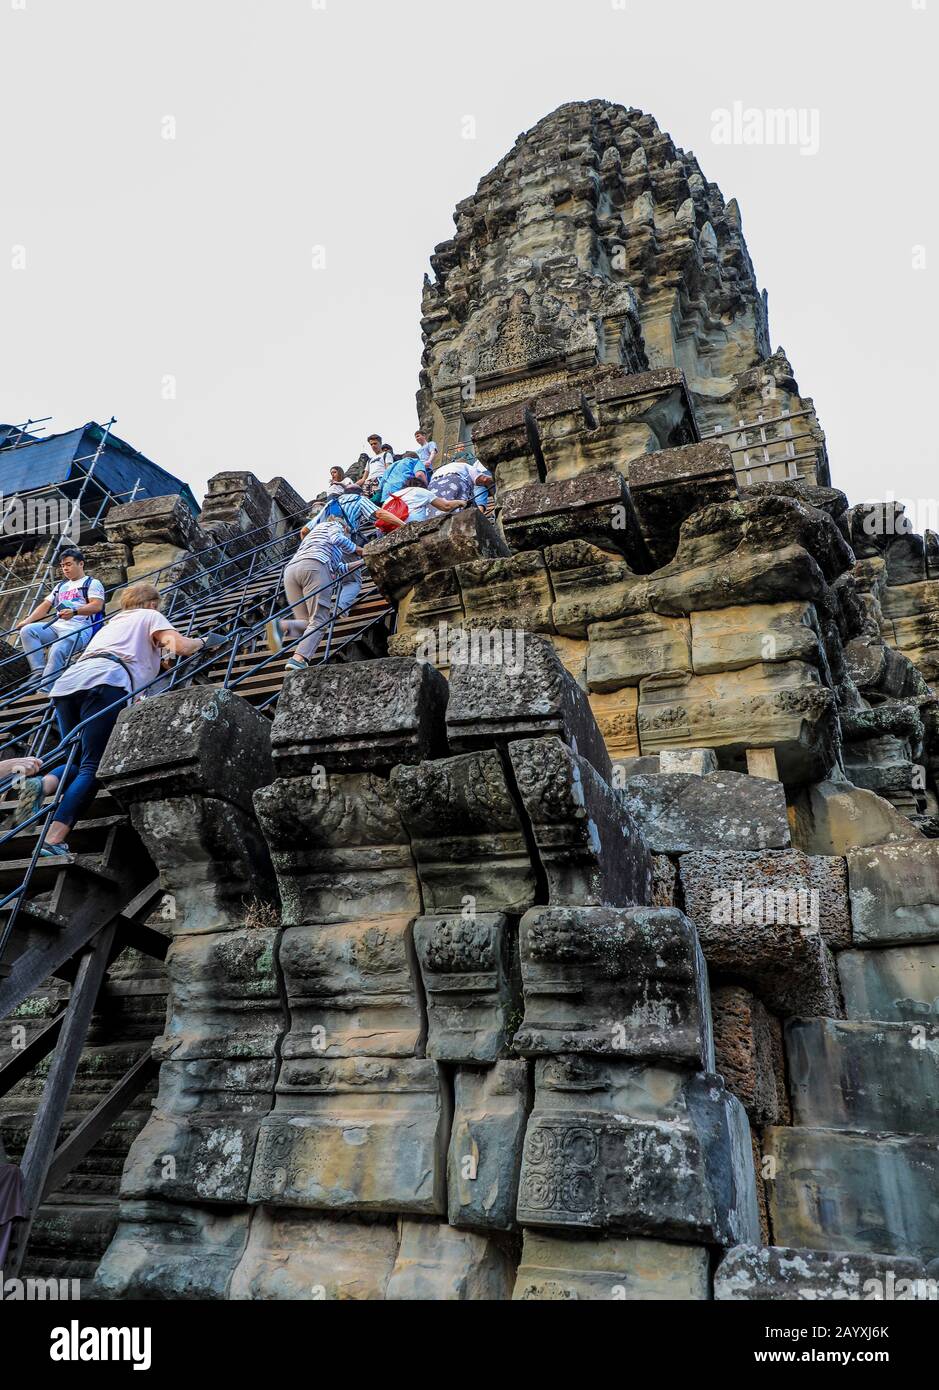 Tourists climbing a tower at the Angkor Wat temple complex, Siem Reap, Cambodia, Asia Stock Photo